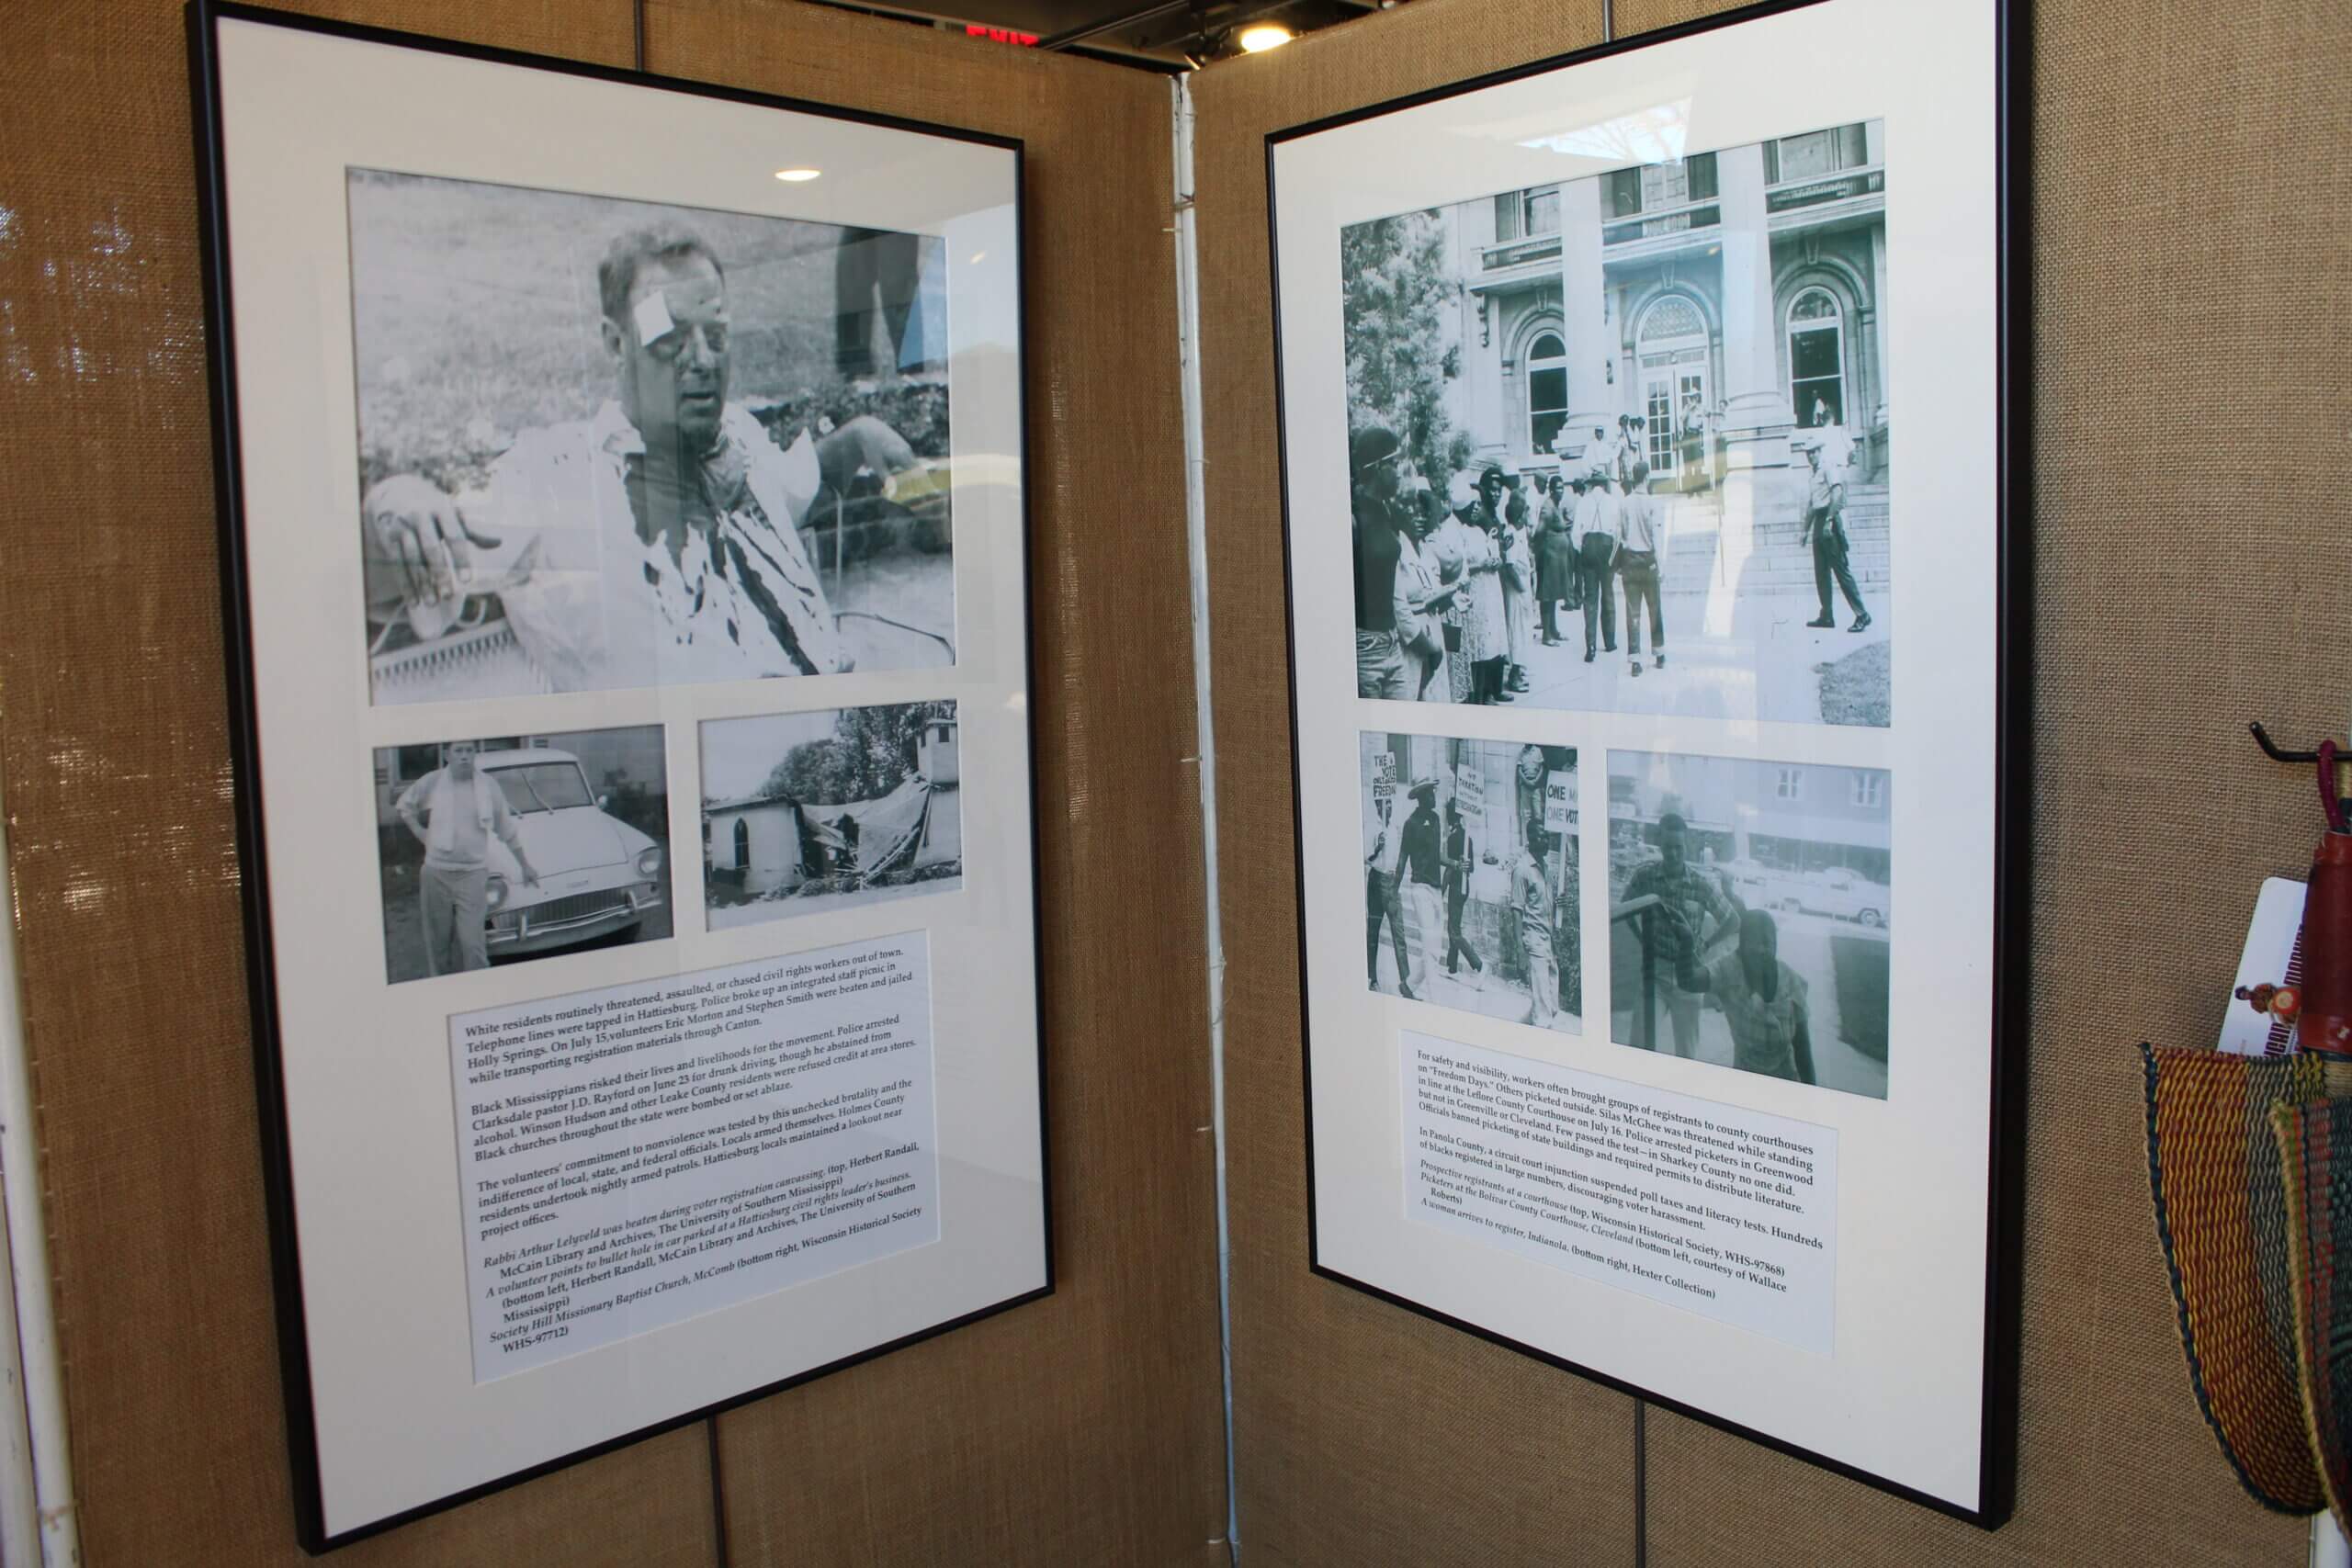 Freedom Summer of '64 and Murder in Neshoba exhibits on display